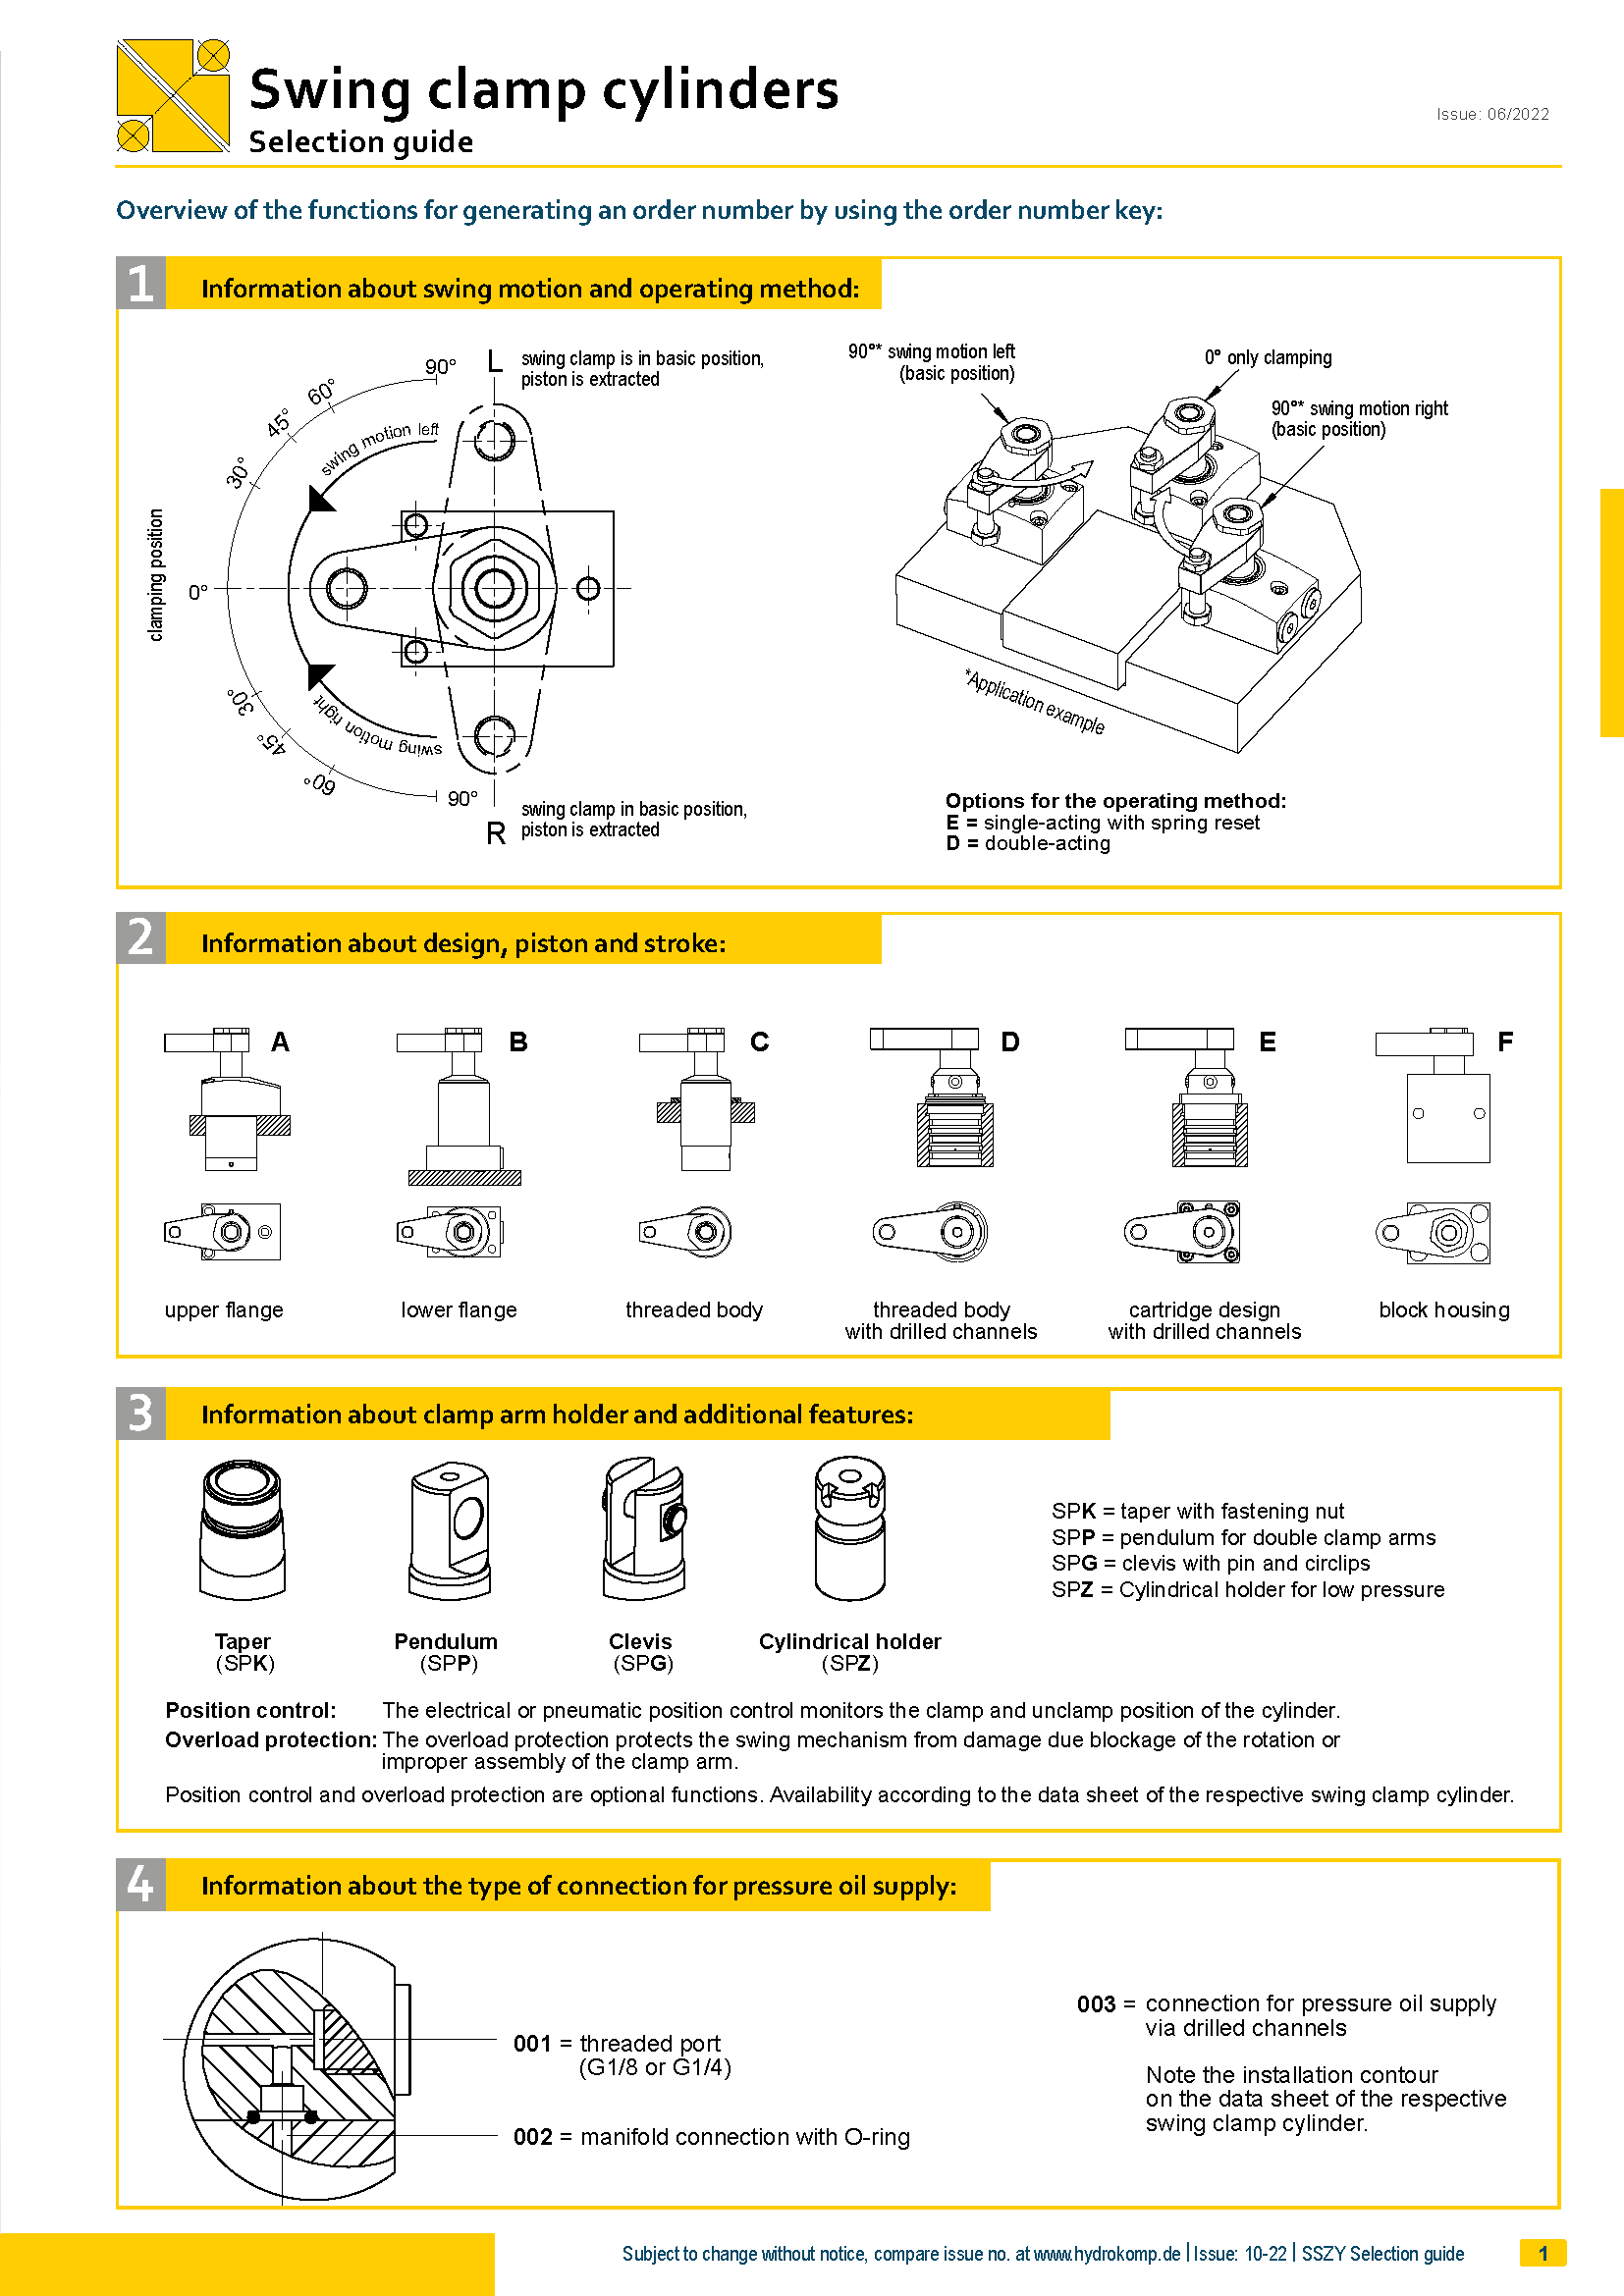 hydrokomp-swing-clamp-cylinders-selection-guideSeite1